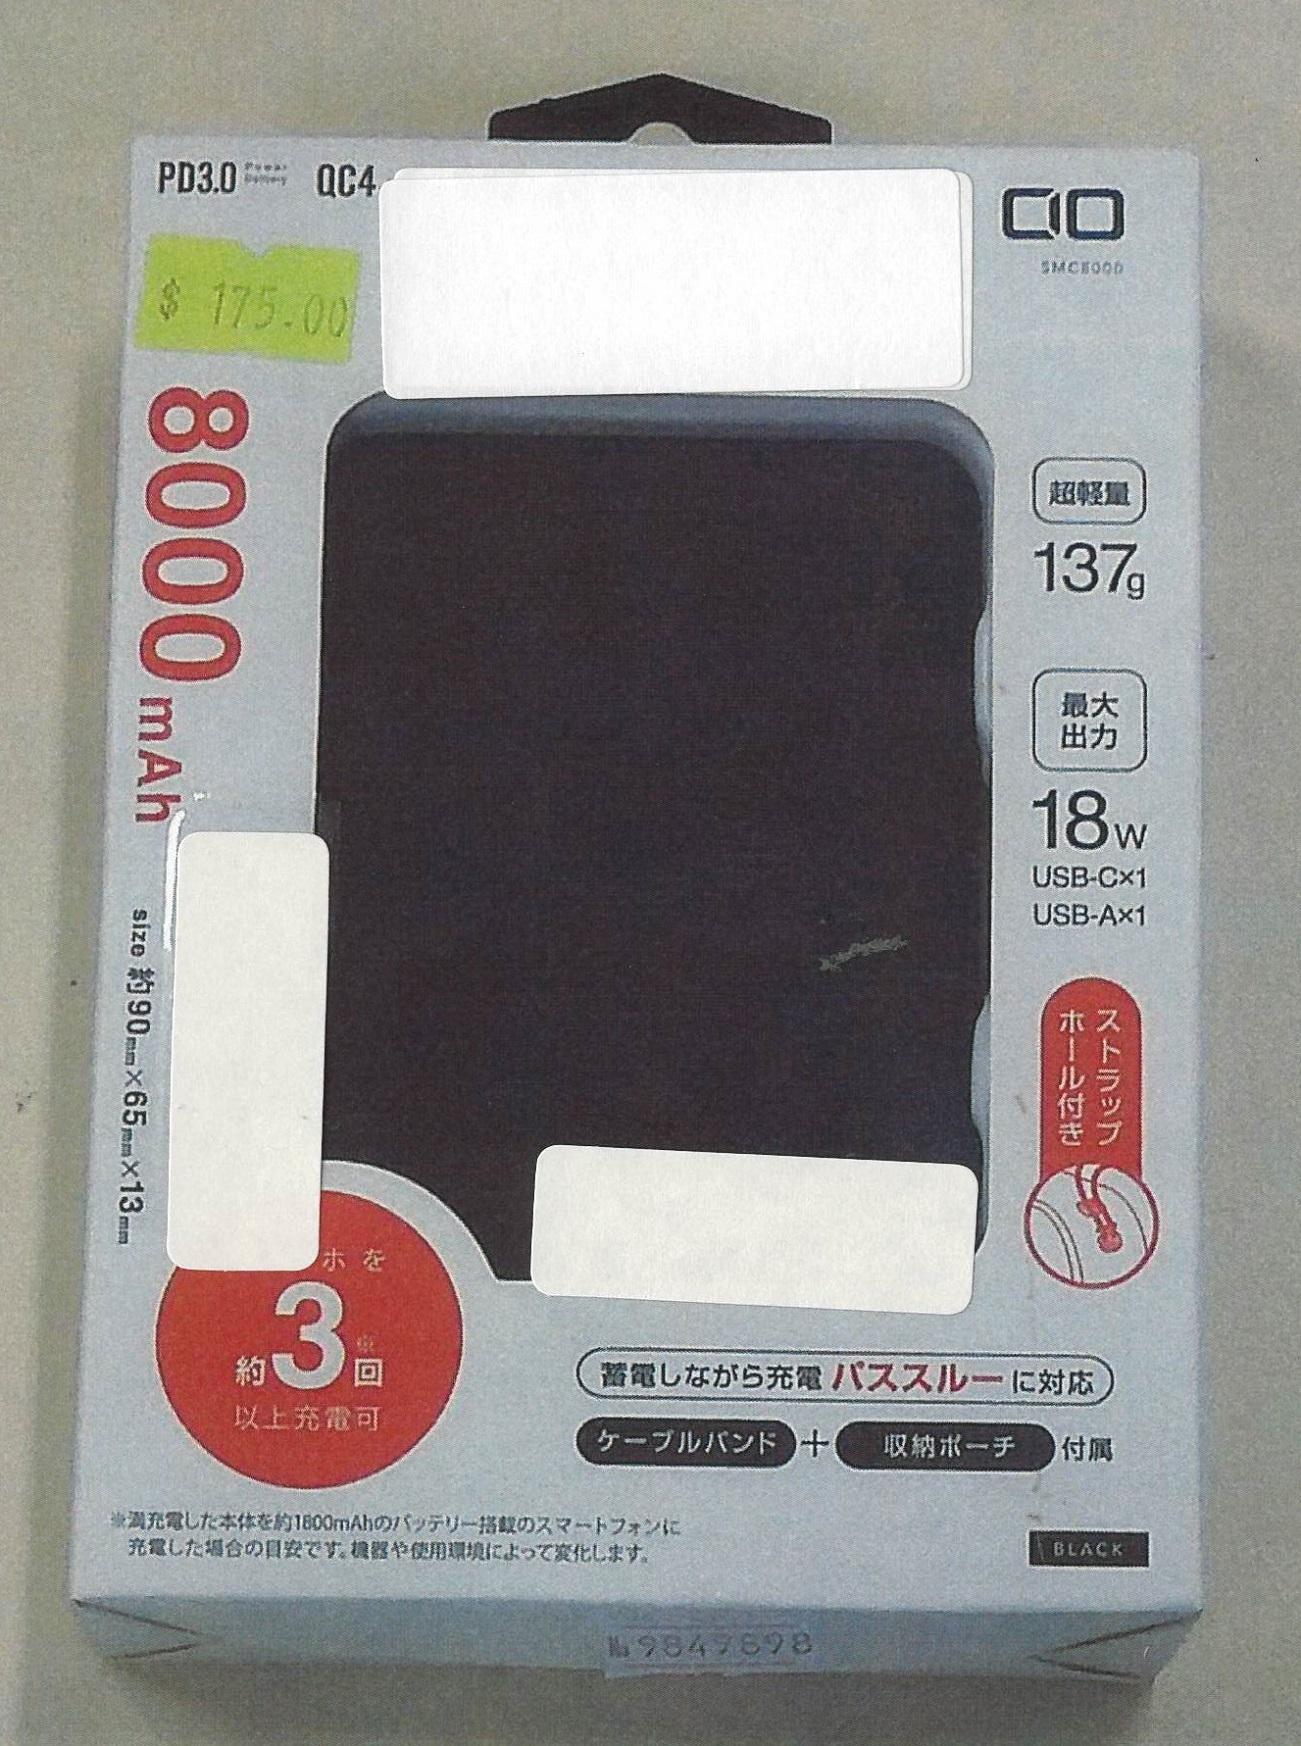 Hong Kong Customs arrested a person-in-charge of an electronic and computer products supplier yesterday (June 6), who was suspected of supplying external power banks with a false trade description, in contravention of the Trade Descriptions Ordinance. Photo shows one of the external power banks involved in the case.